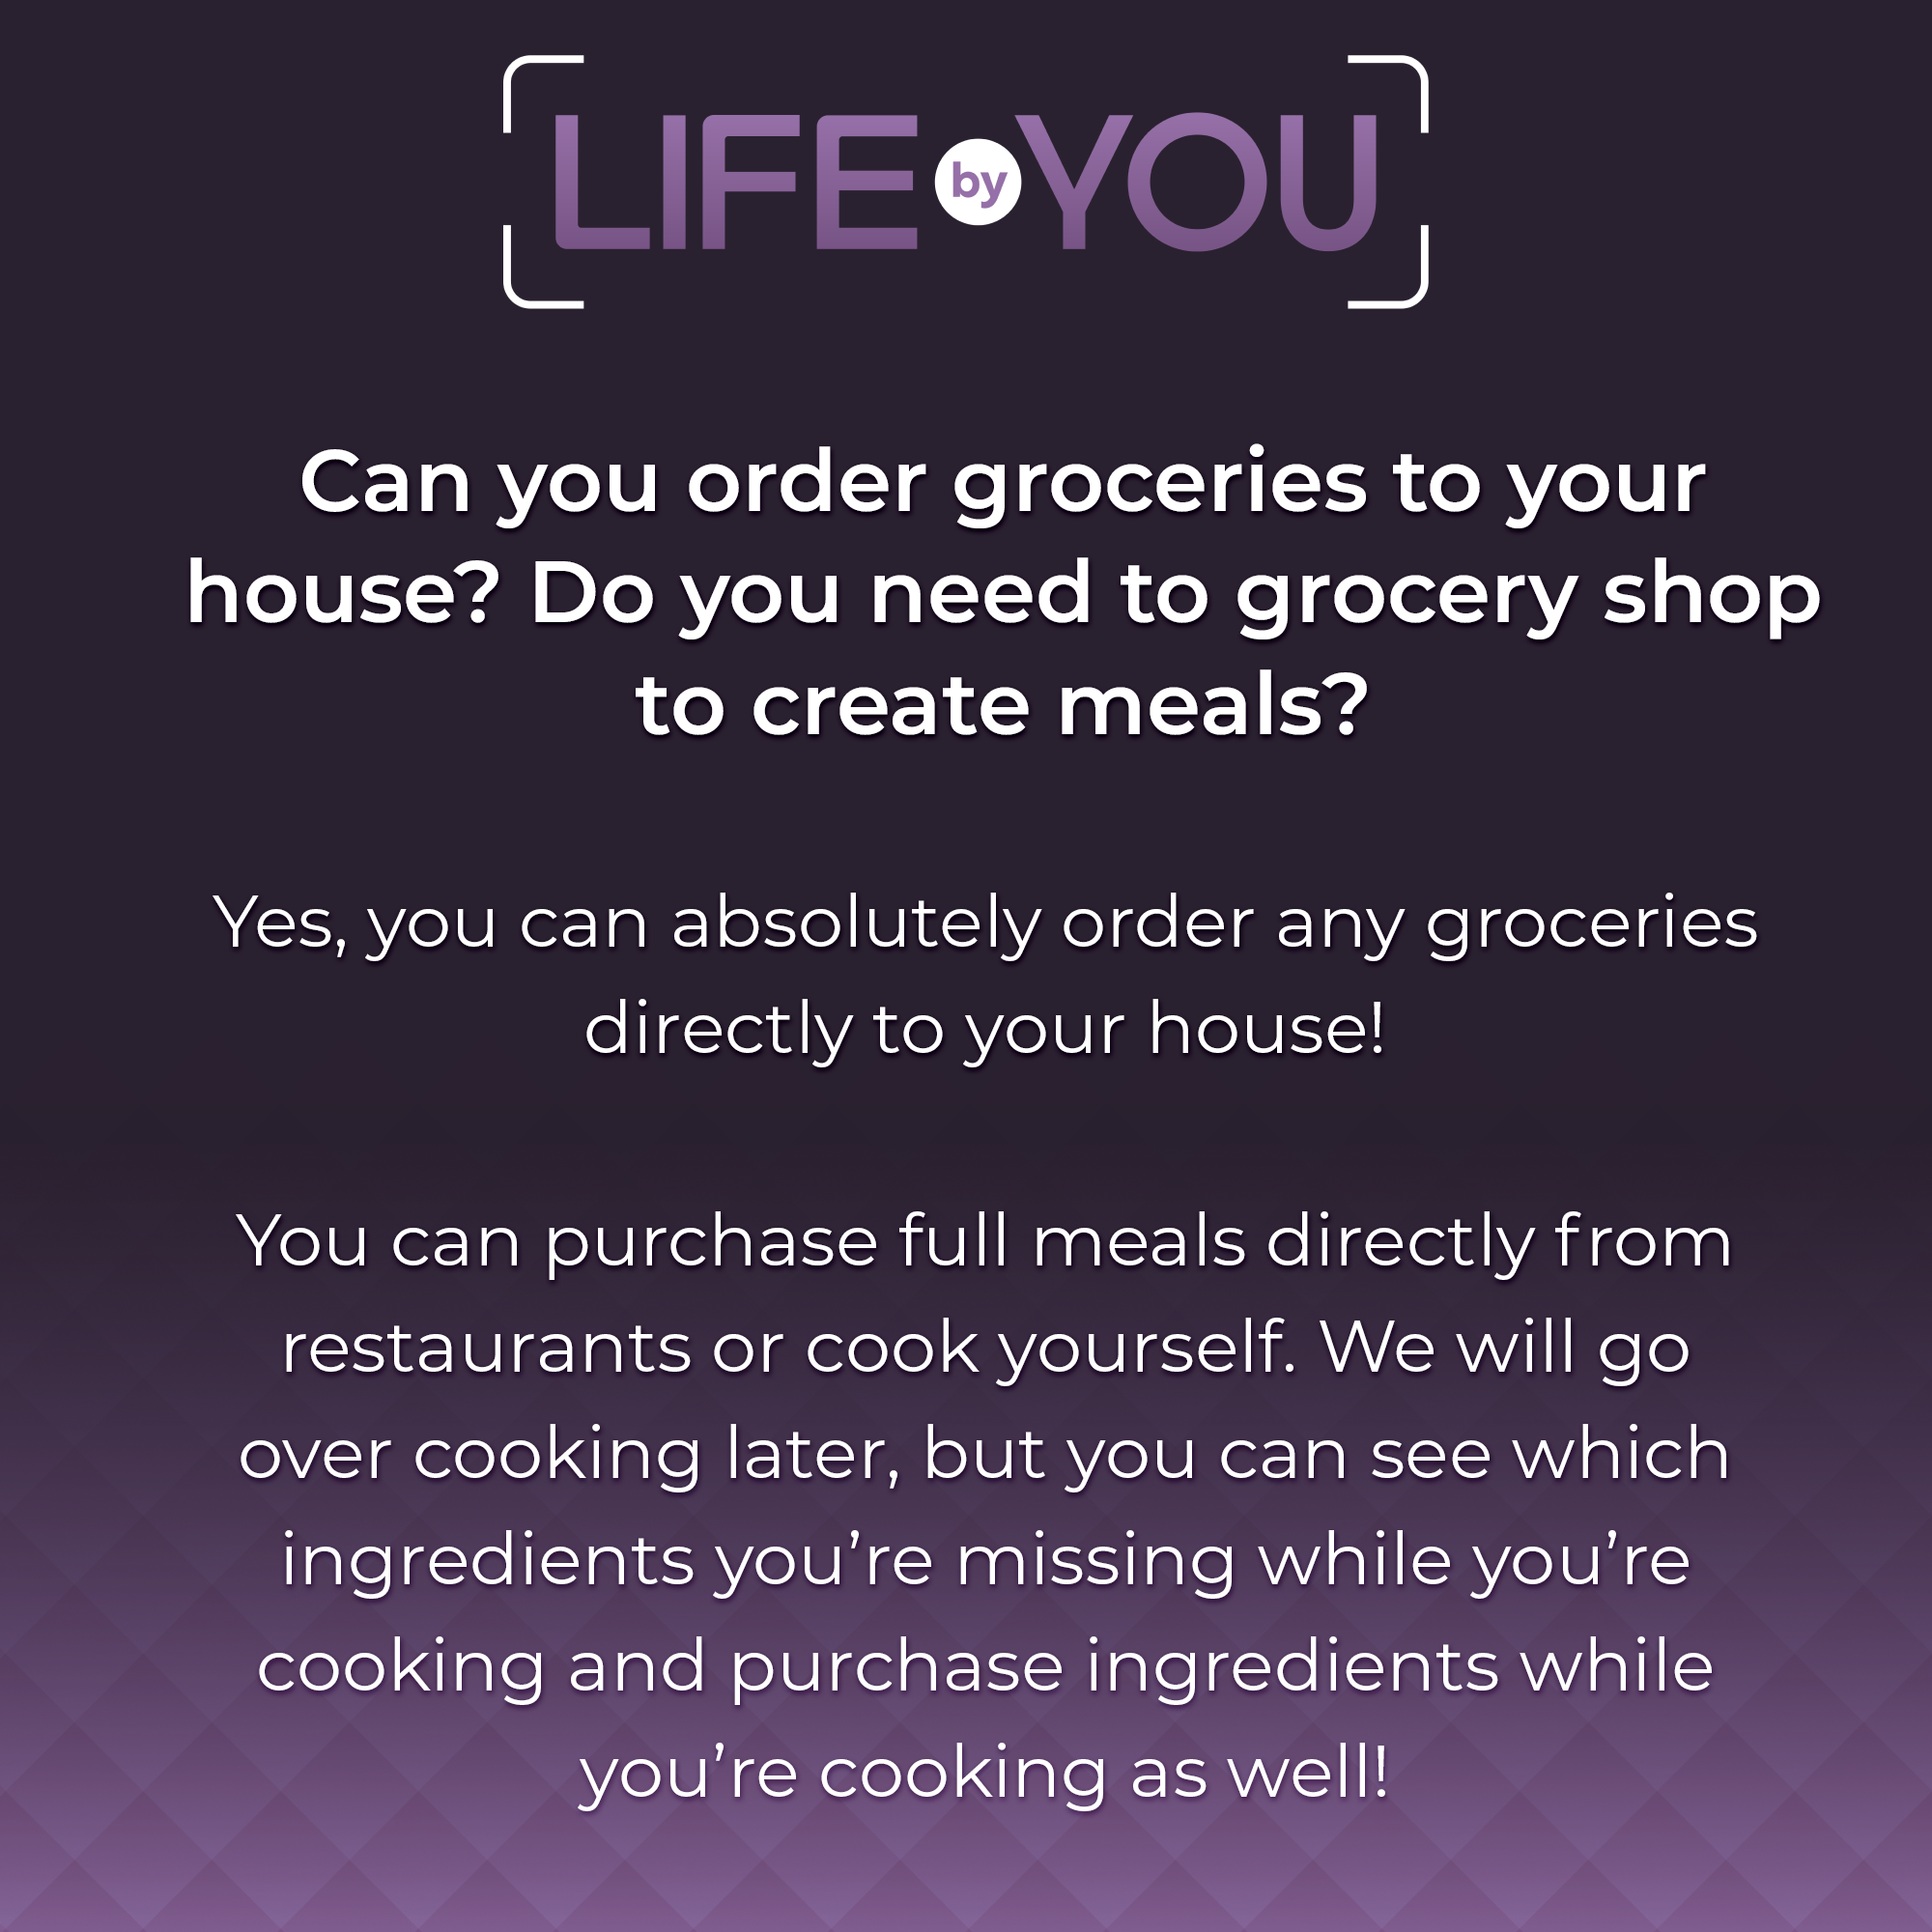 QnA Can you order groceries to your house?